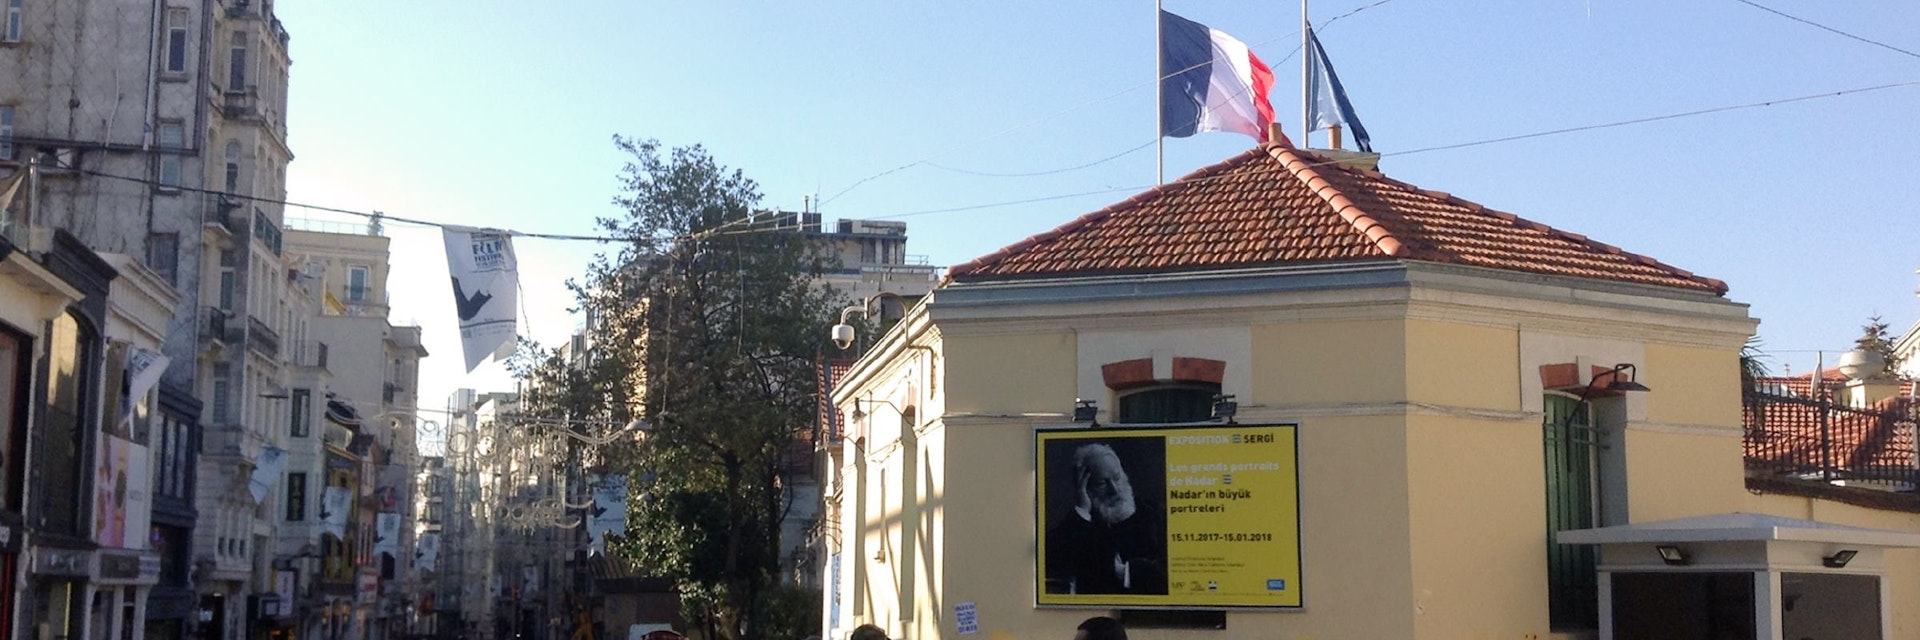 French Cultural Centre on İstiklal Caddesi